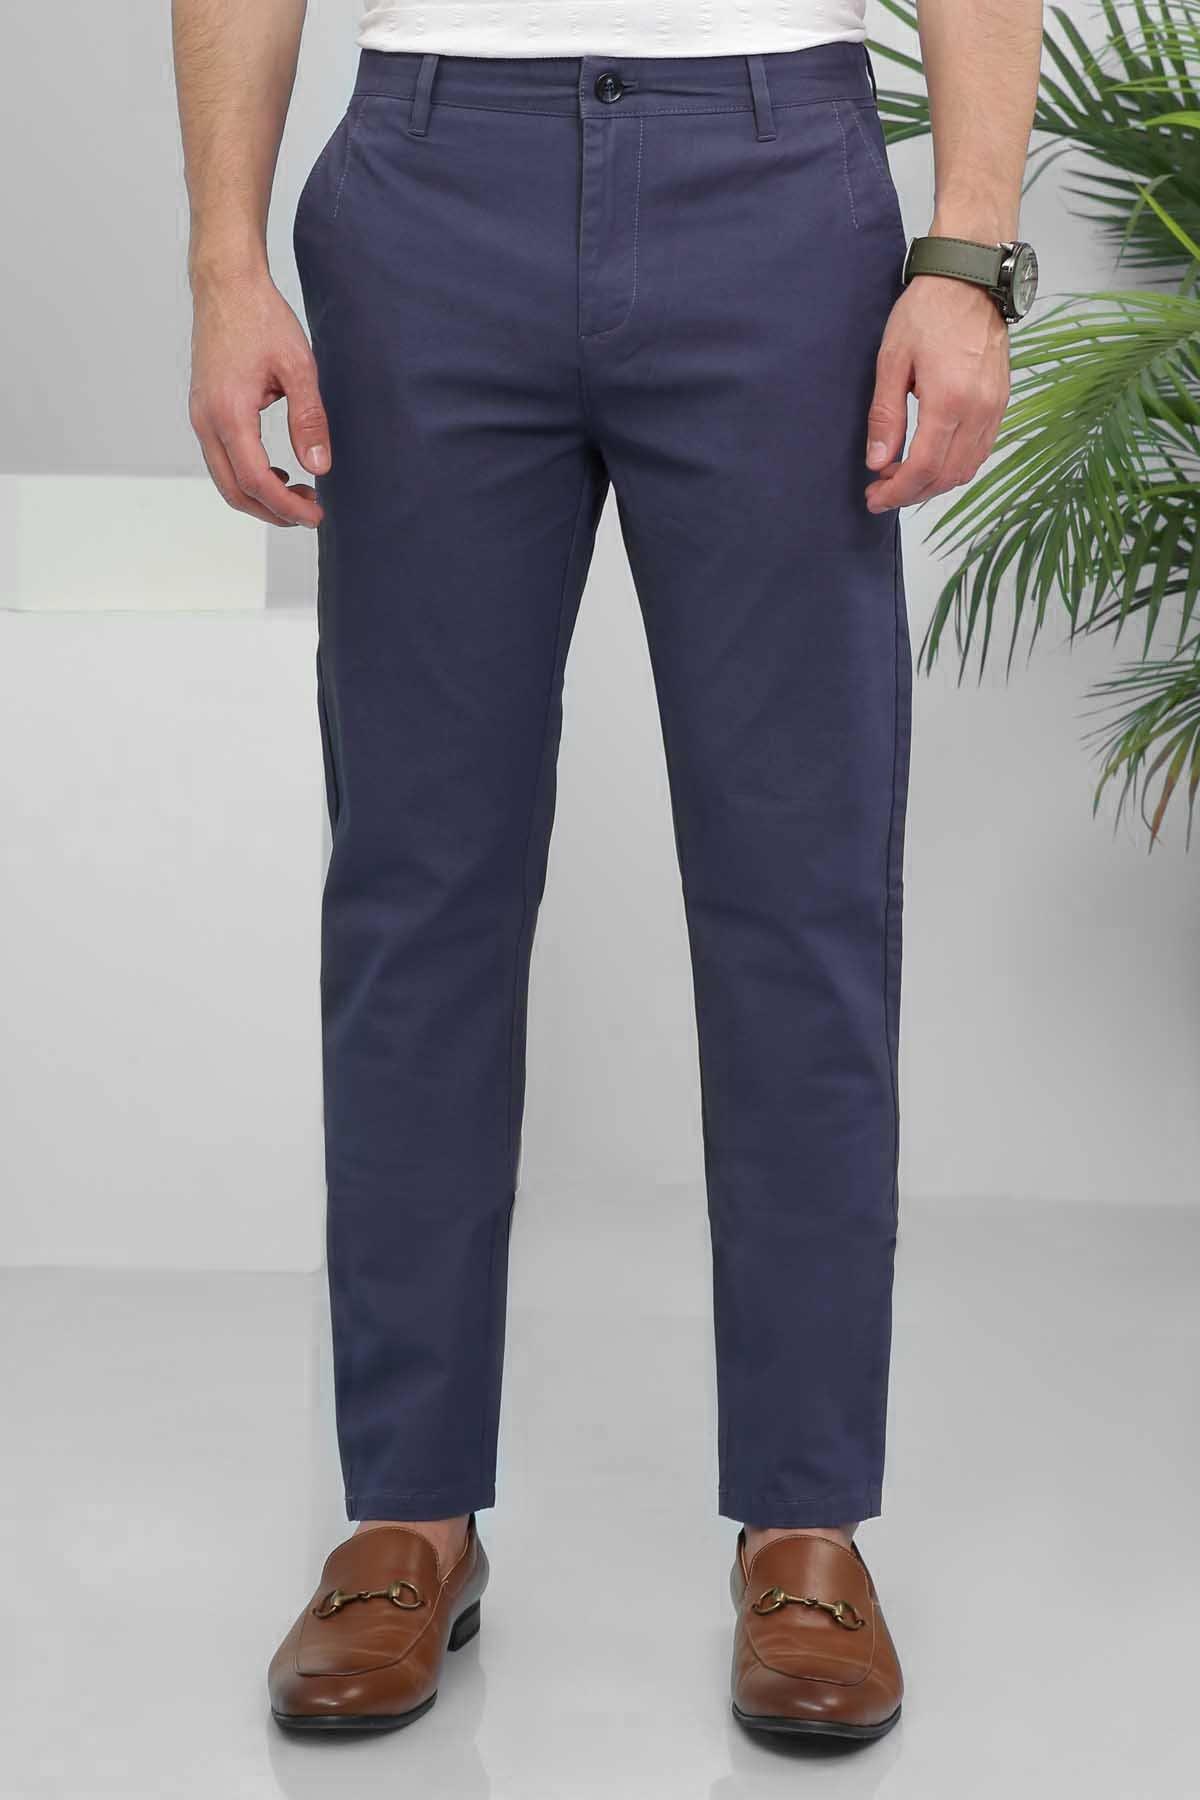 CASUAL PANT SLIM FIT NAVY BLUE at Charcoal Clothing